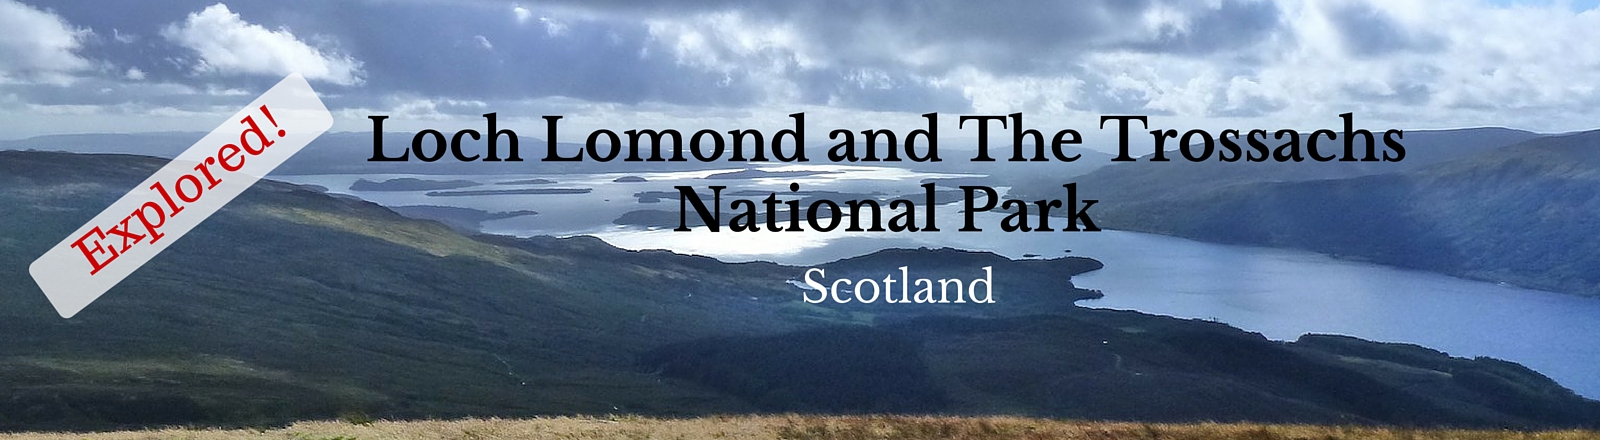 National Parks Guy, Exploring Loch Lomond and the Trossachs National Park